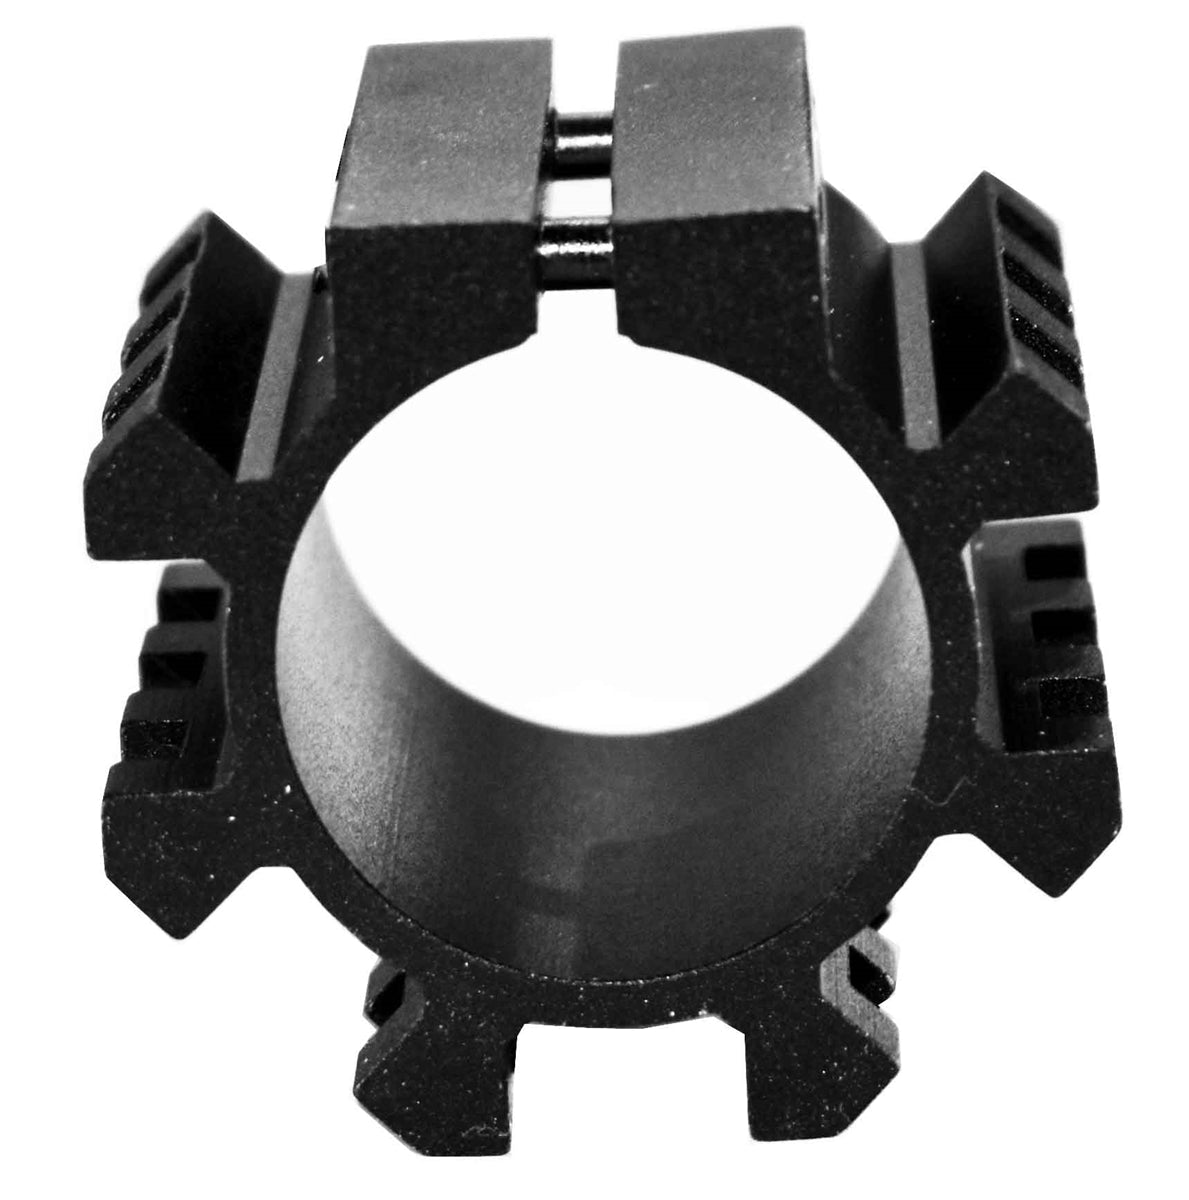 Tactical Picatinny Rail Mount Adapter for Magazine Tubes Compatible With Mossberg Maverick 88 12 Gauge Pumps. - TRINITY SUPPLY INC